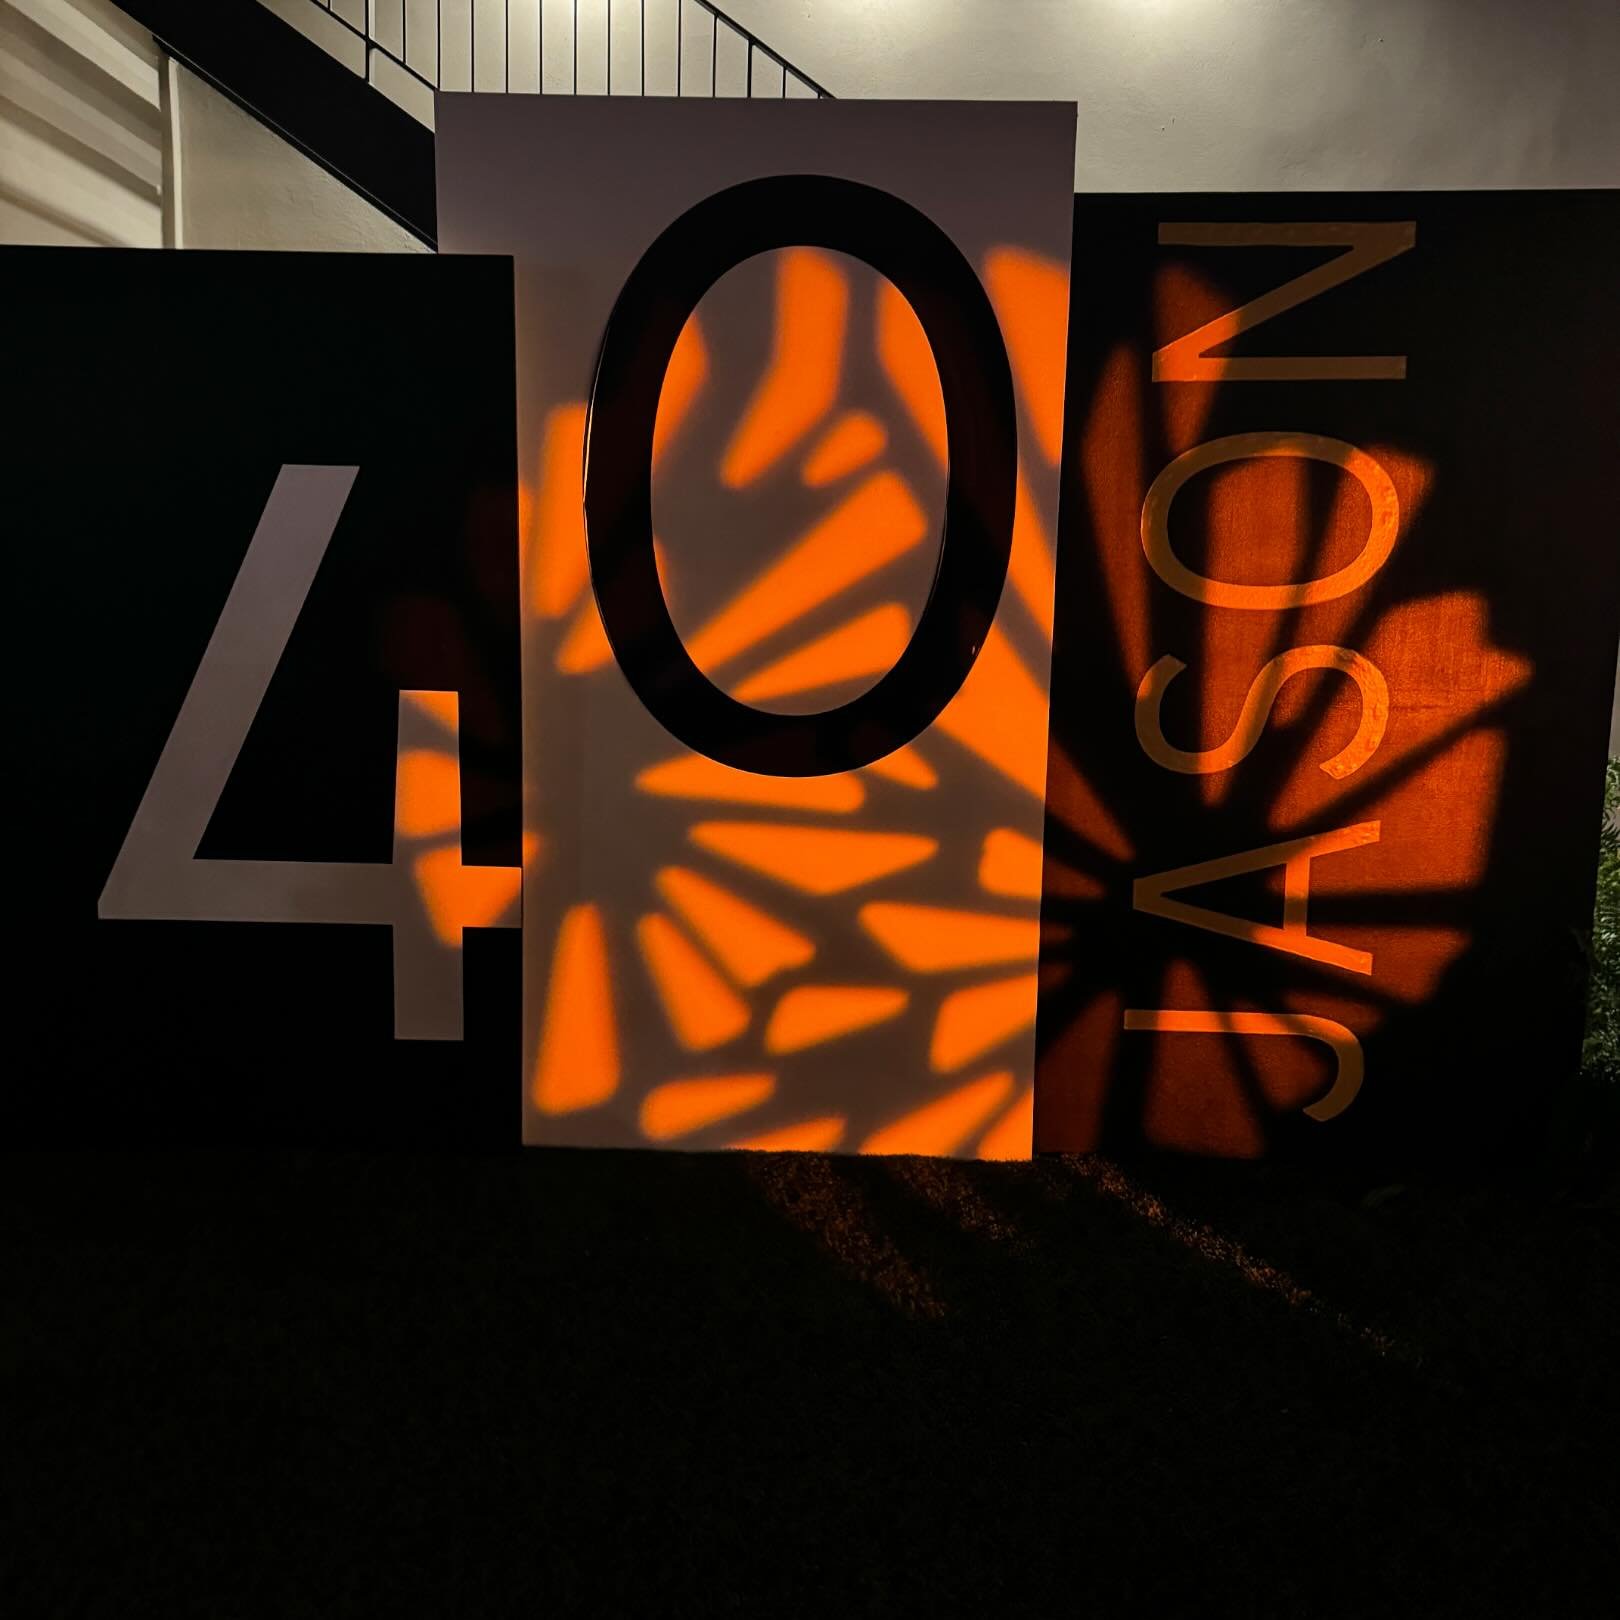 We love when we can add some extra lighting to your event, so when the night comes, another extra unexpected decor arrives! #atxeventplanner #austinevents #austineventplanner #atxevents #milestonebirthday